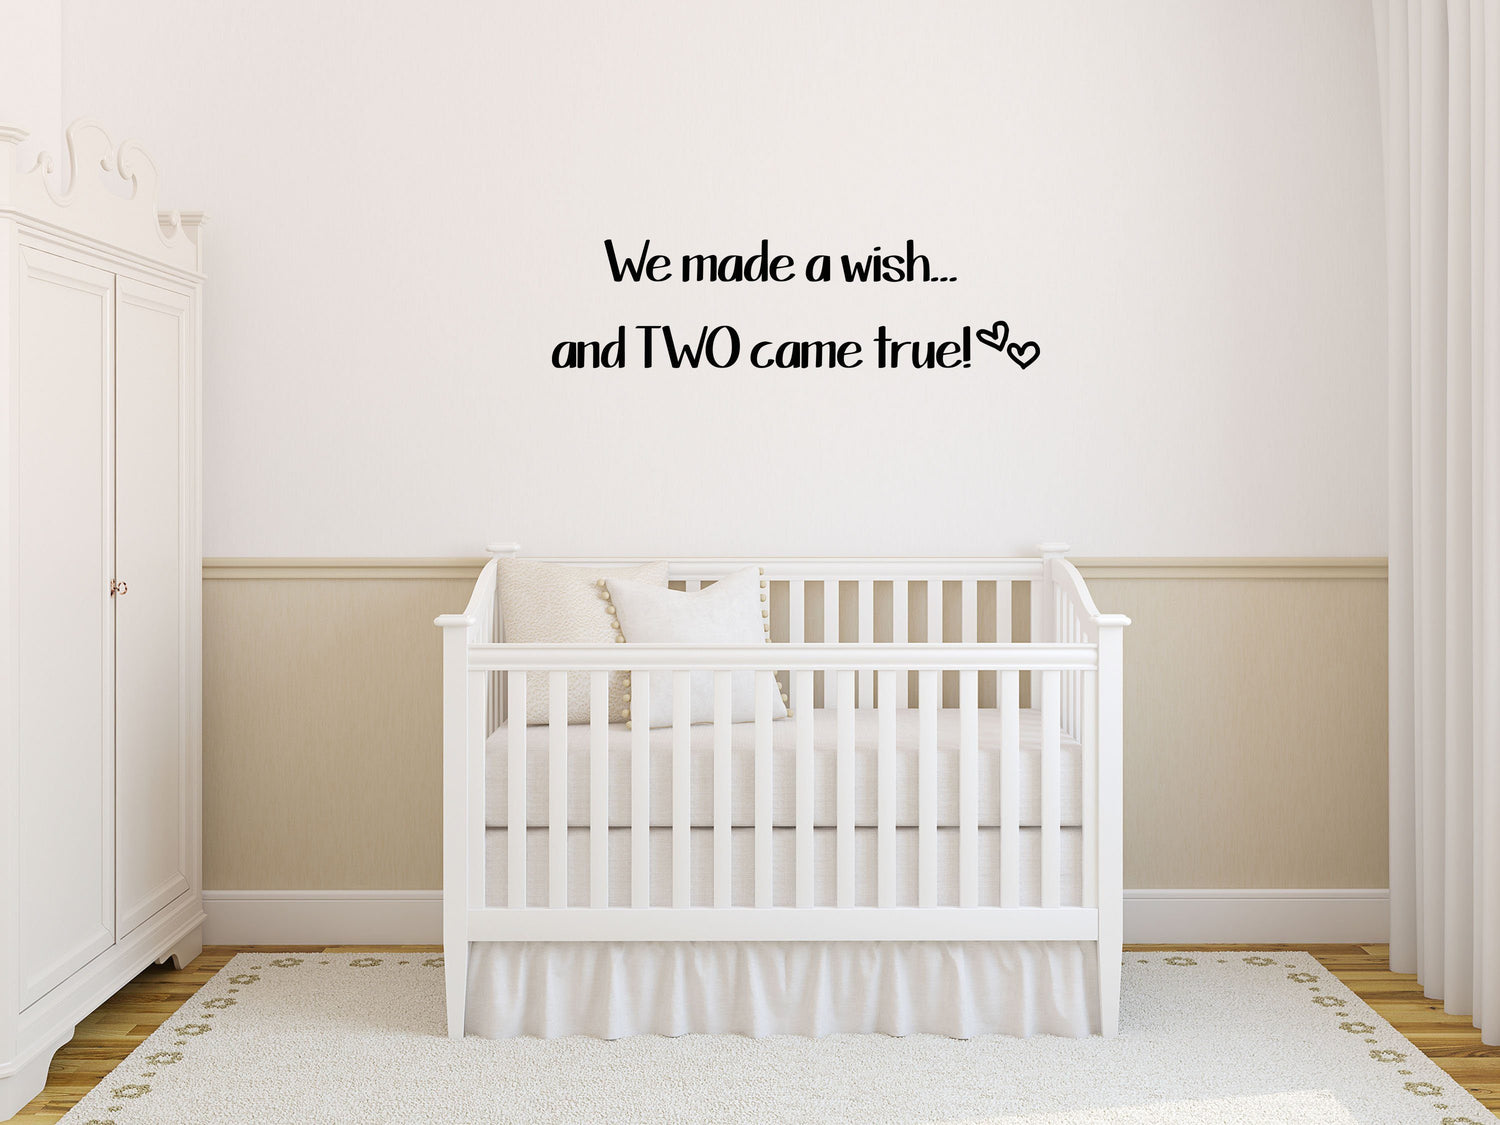 We Made A Wish and Two Came True - Inspirational Wall Decals Vinyl Wall Decal Inspirational Wall Signs 